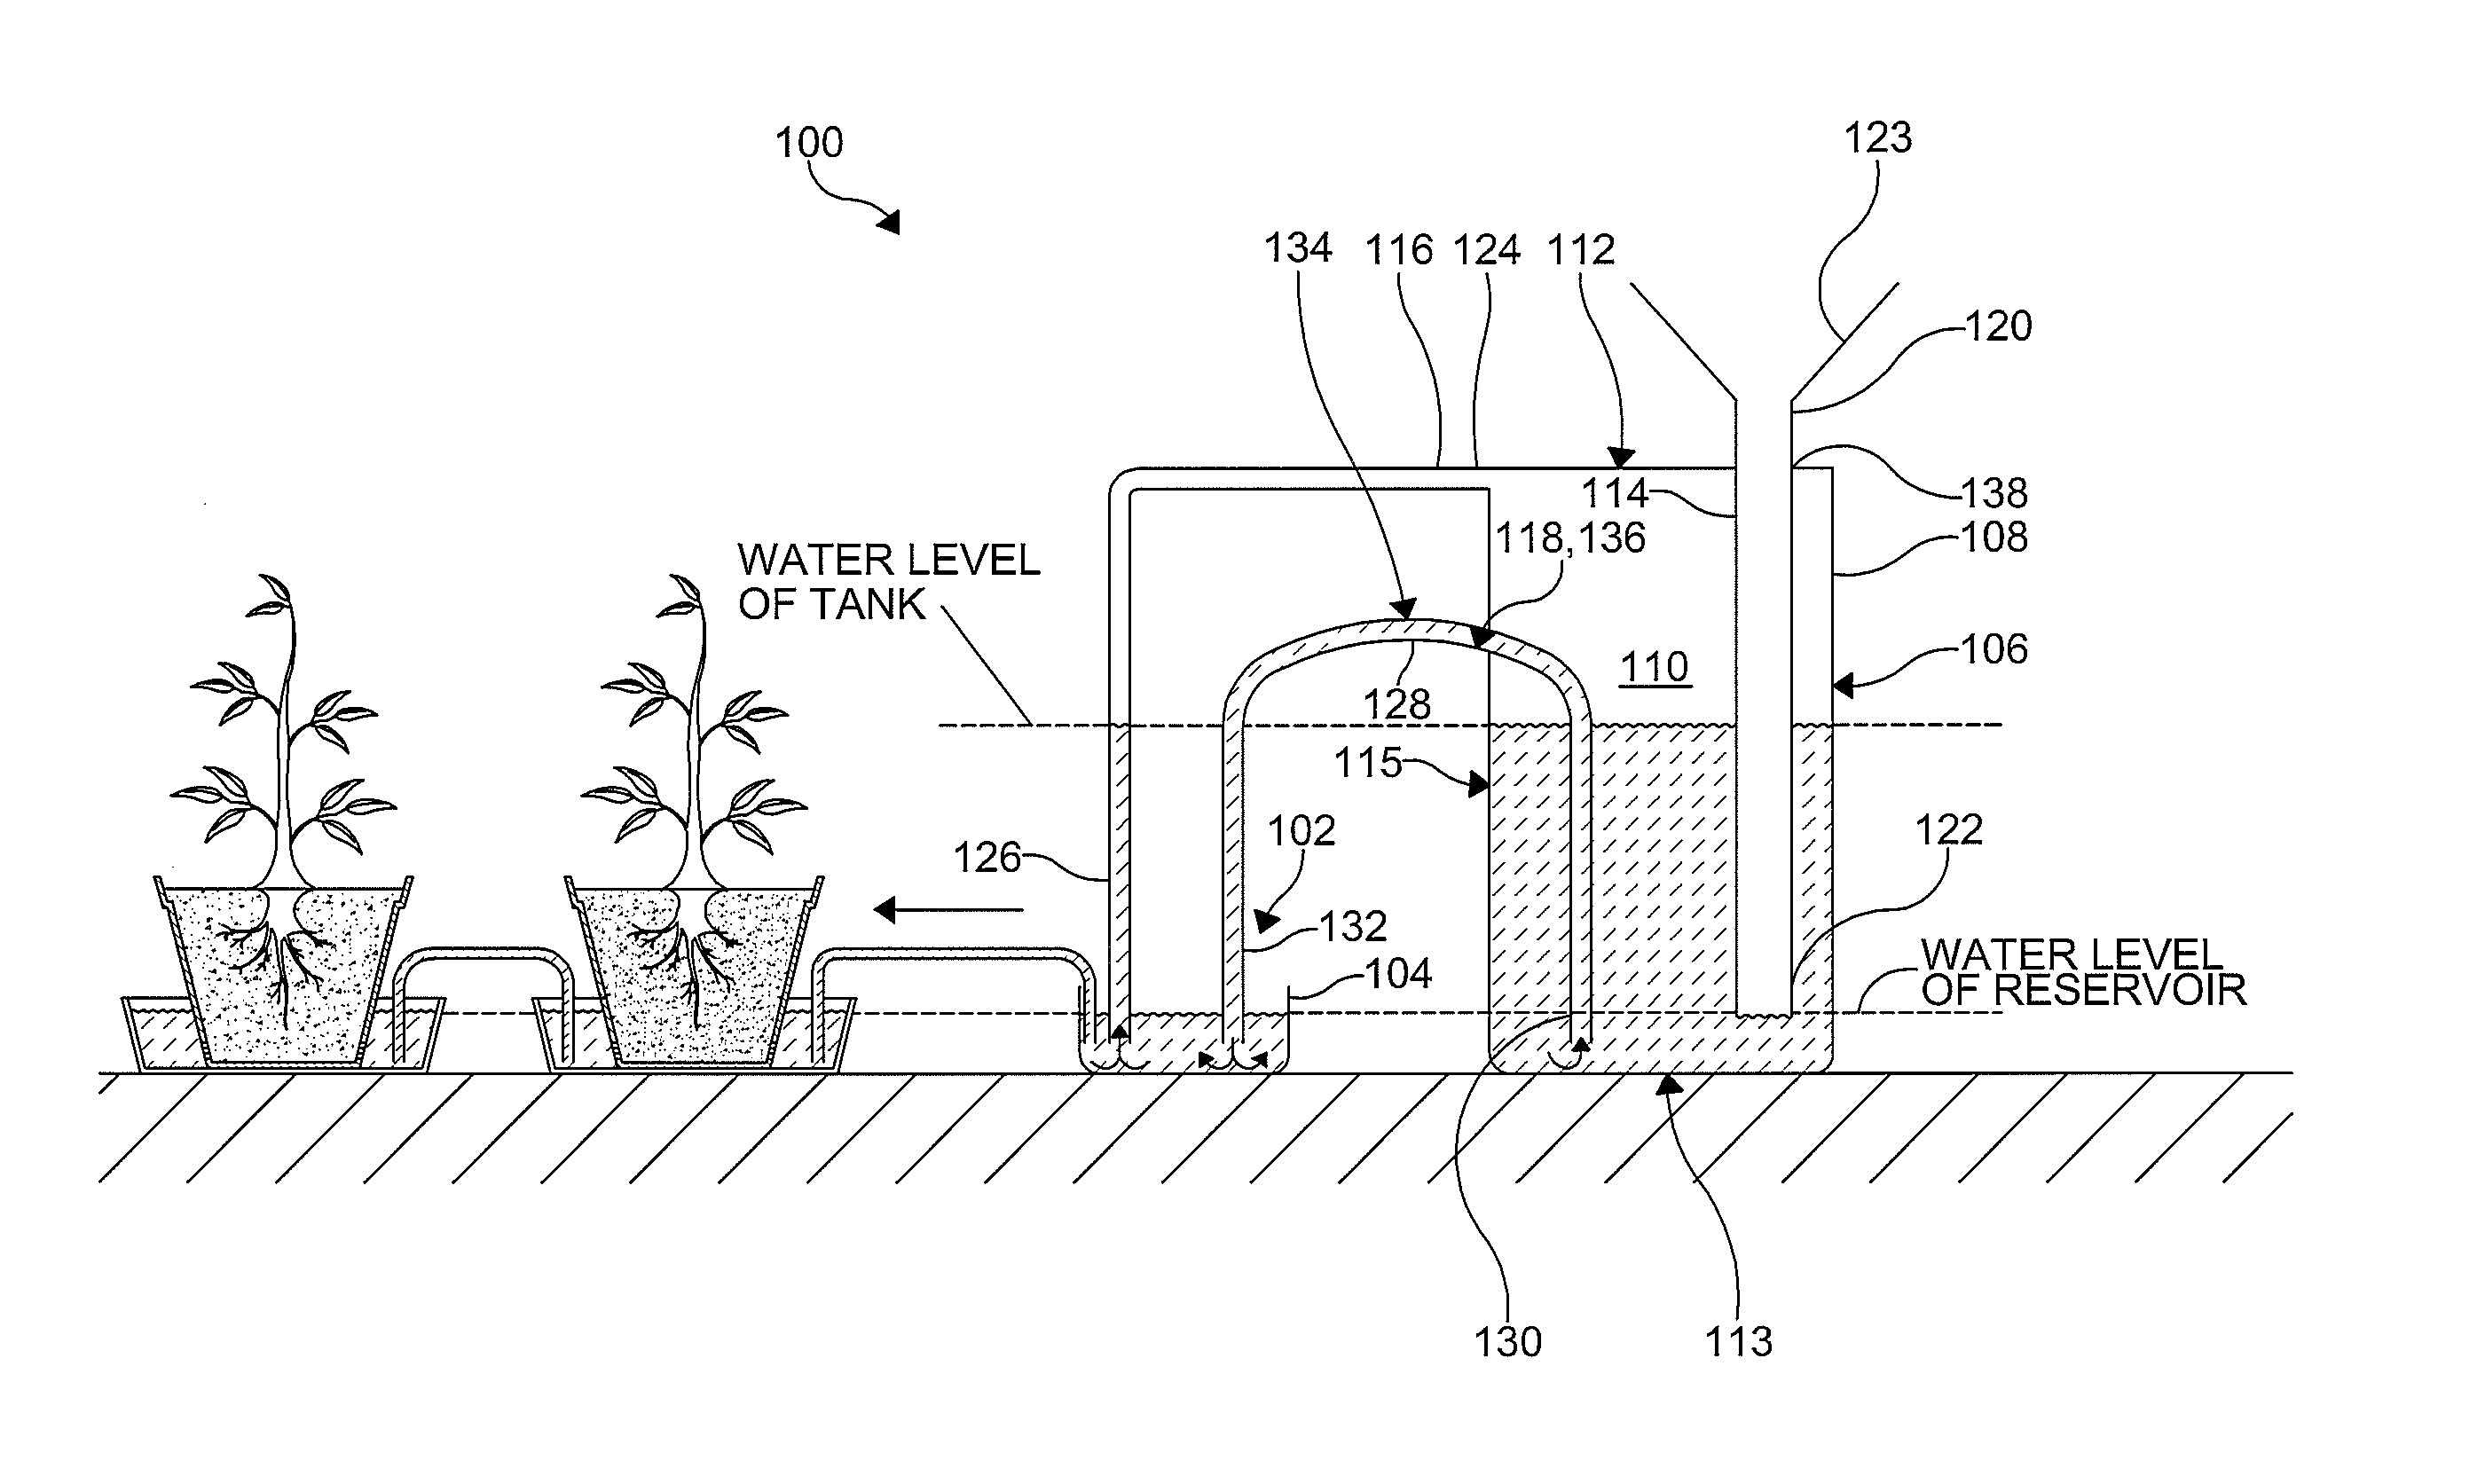 Liquid storage and delivery system